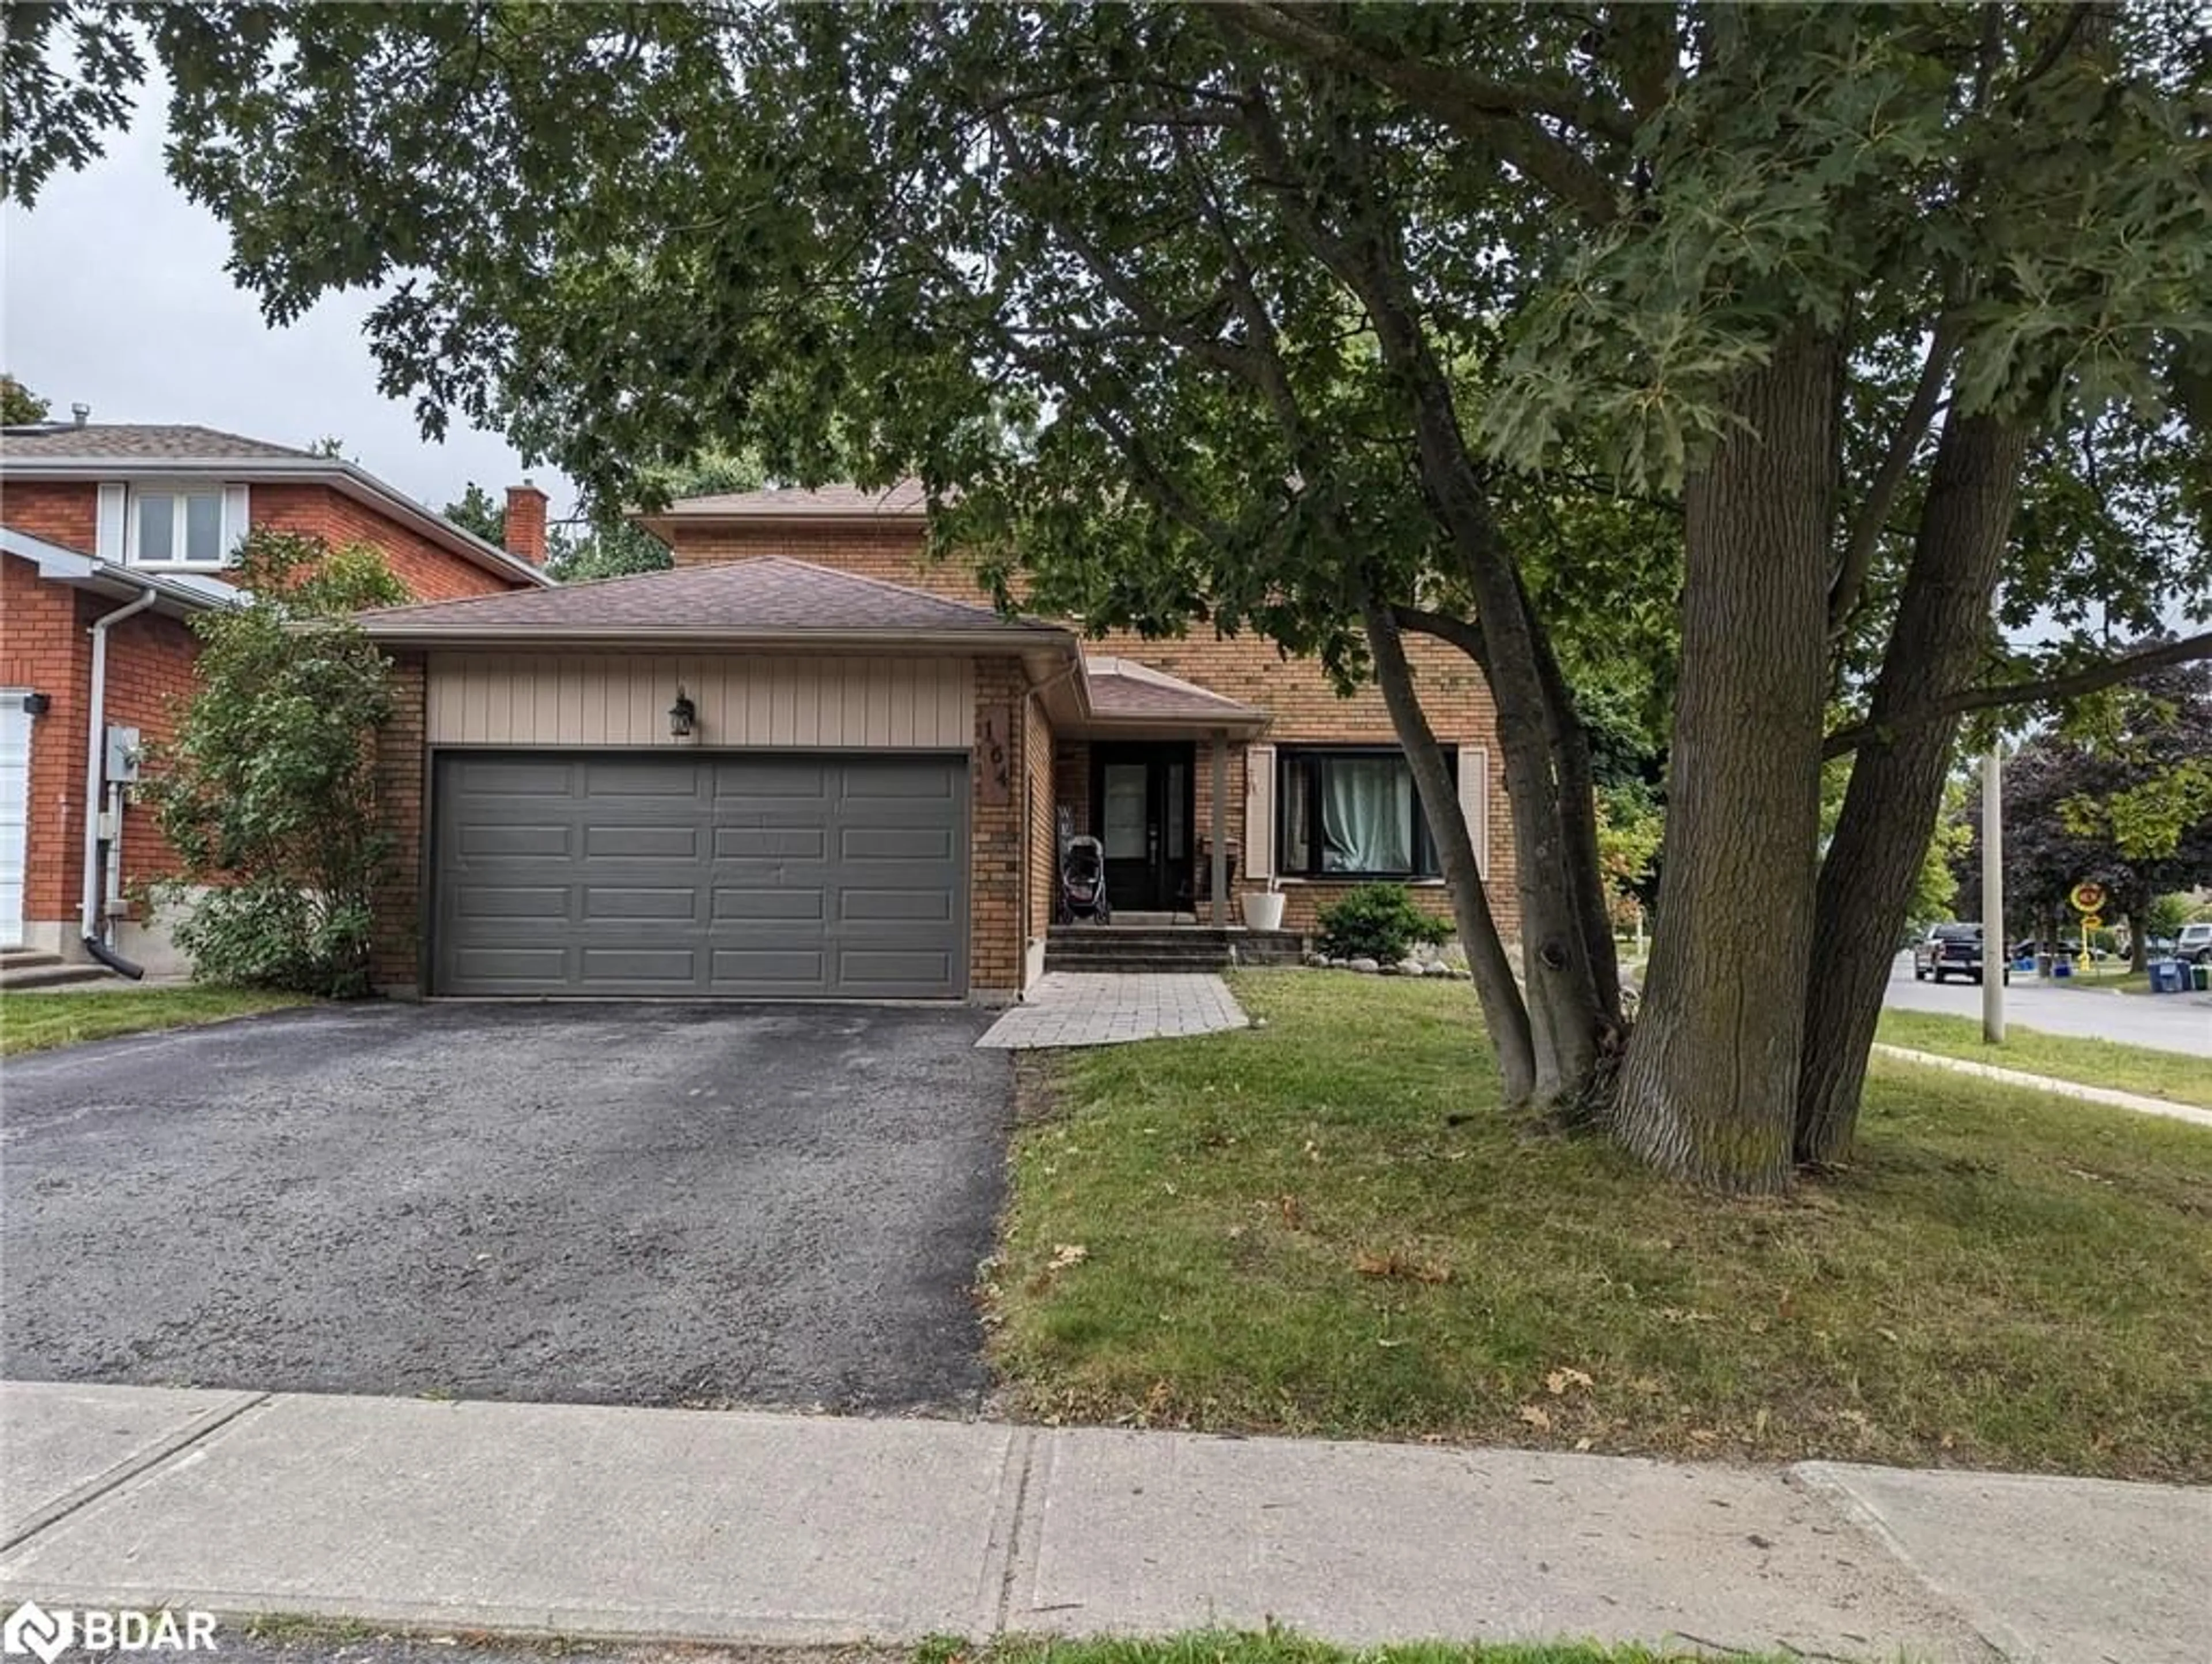 Frontside or backside of a home for 164 Fox Run, Barrie Ontario L4N 6E3